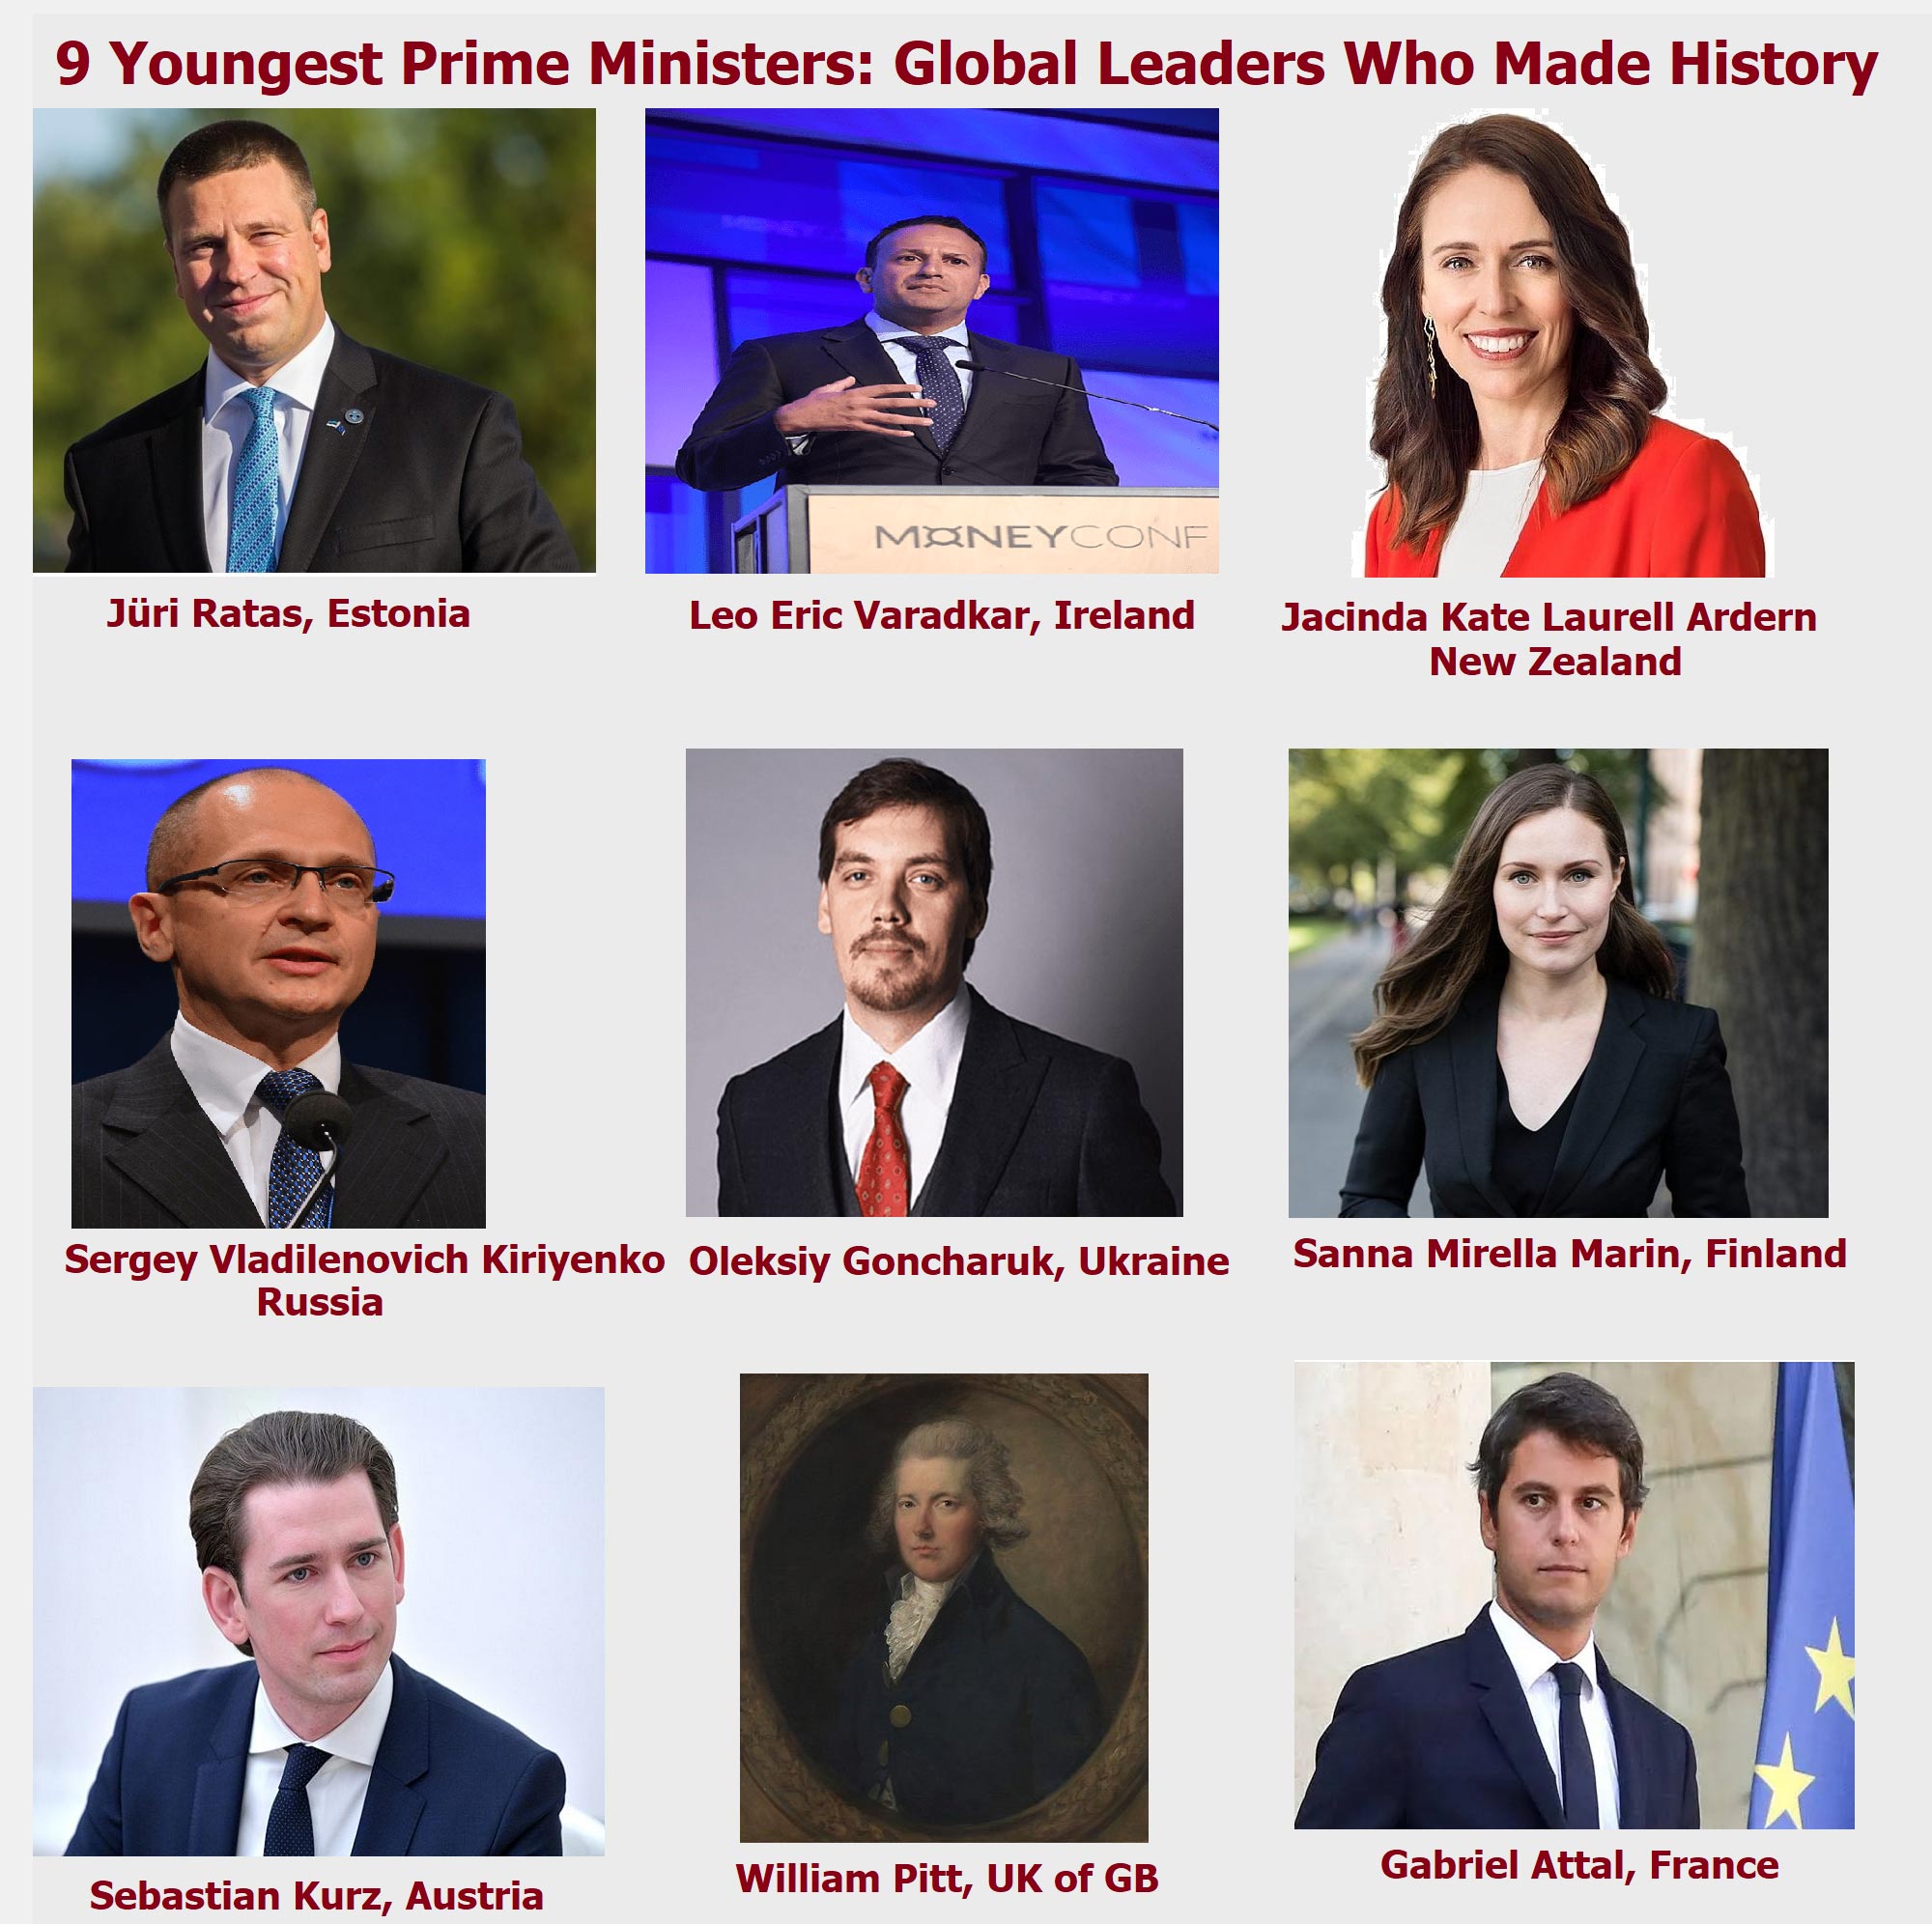 9 Youngest Prime Ministers in the world